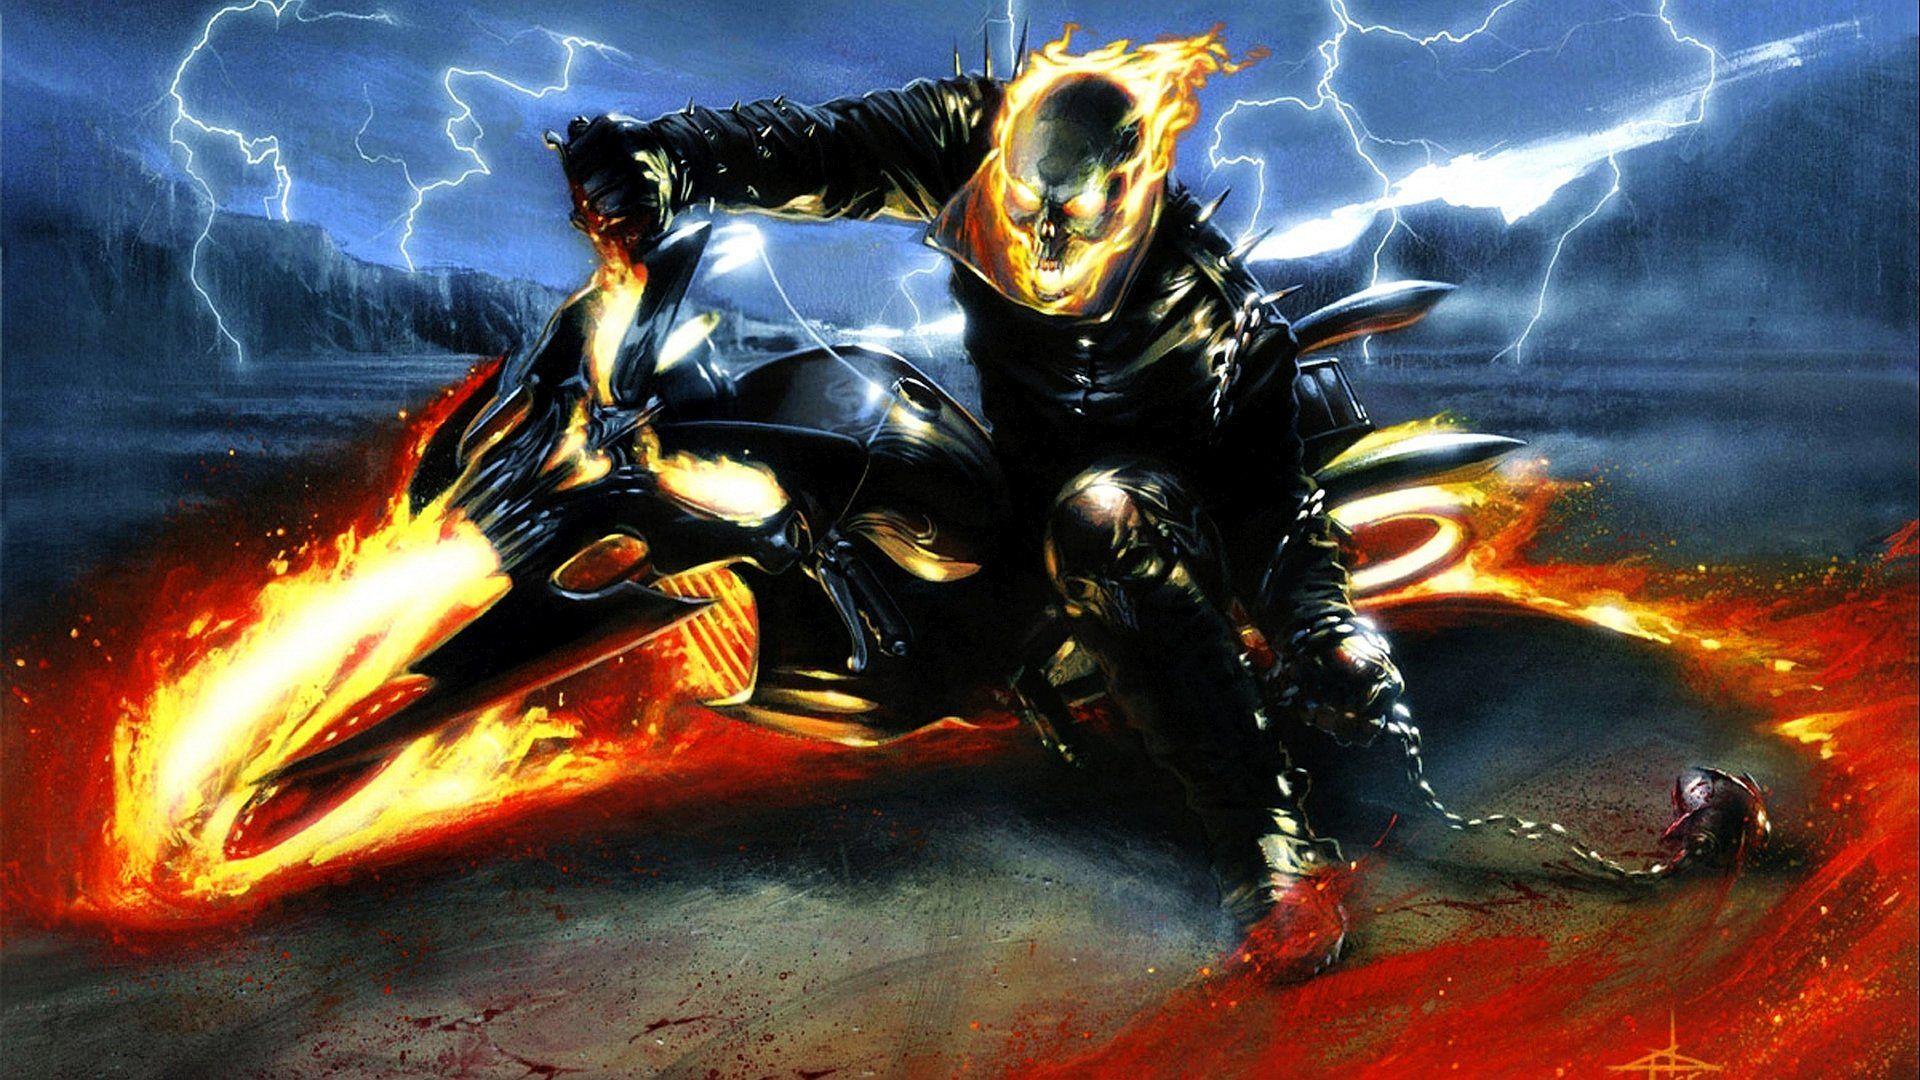 Wallpapers Of Ghost Rider Bikes - Wallpaper Cave